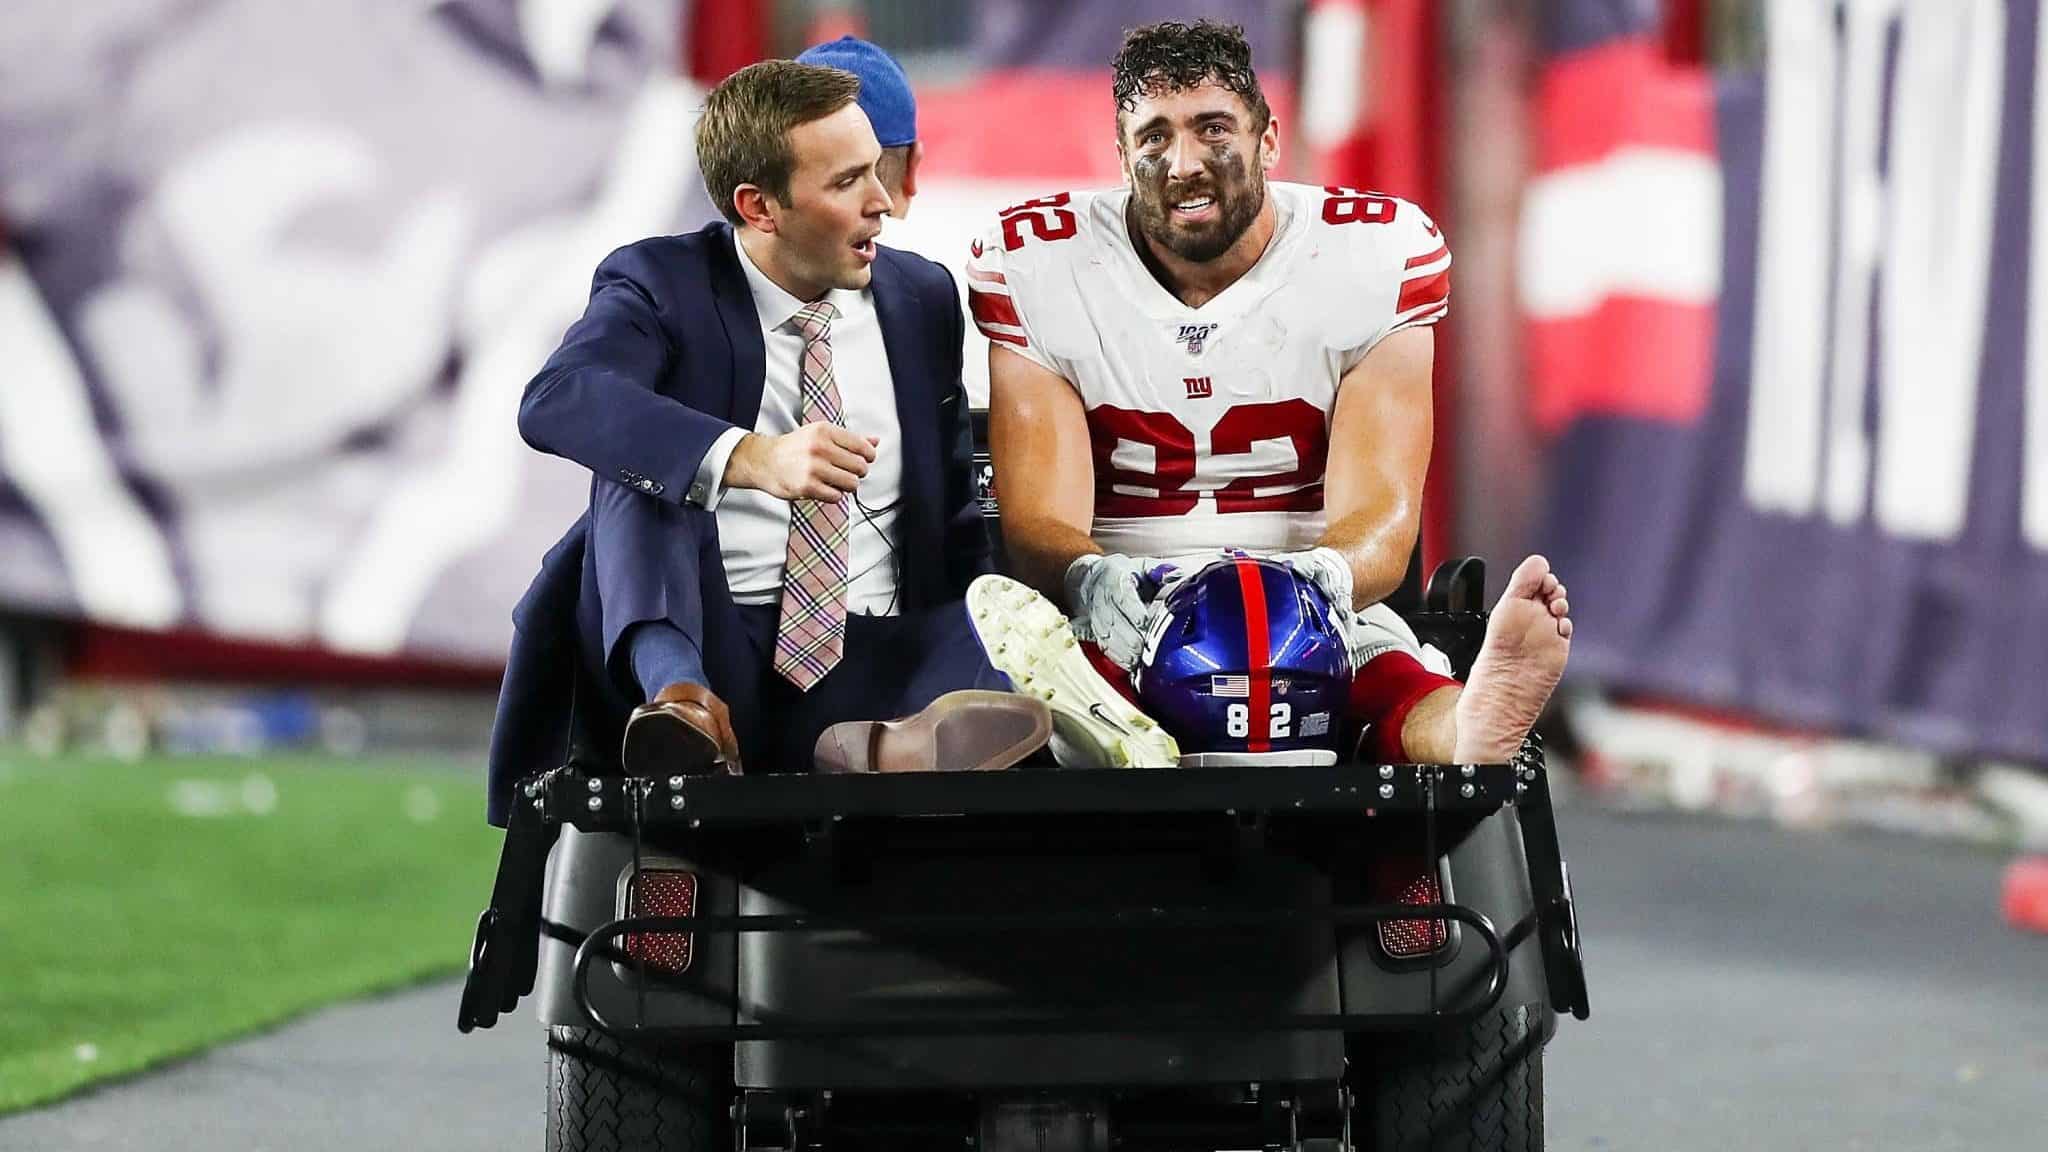 FOXBOROUGH, MA - AUGUST 29: Scott Simonson #82 of the New York Giants is carted off the field after an injury during a preseason game against the New England Patriots at Gillette Stadium on August 29, 2019 in Foxborough, Massachusetts.